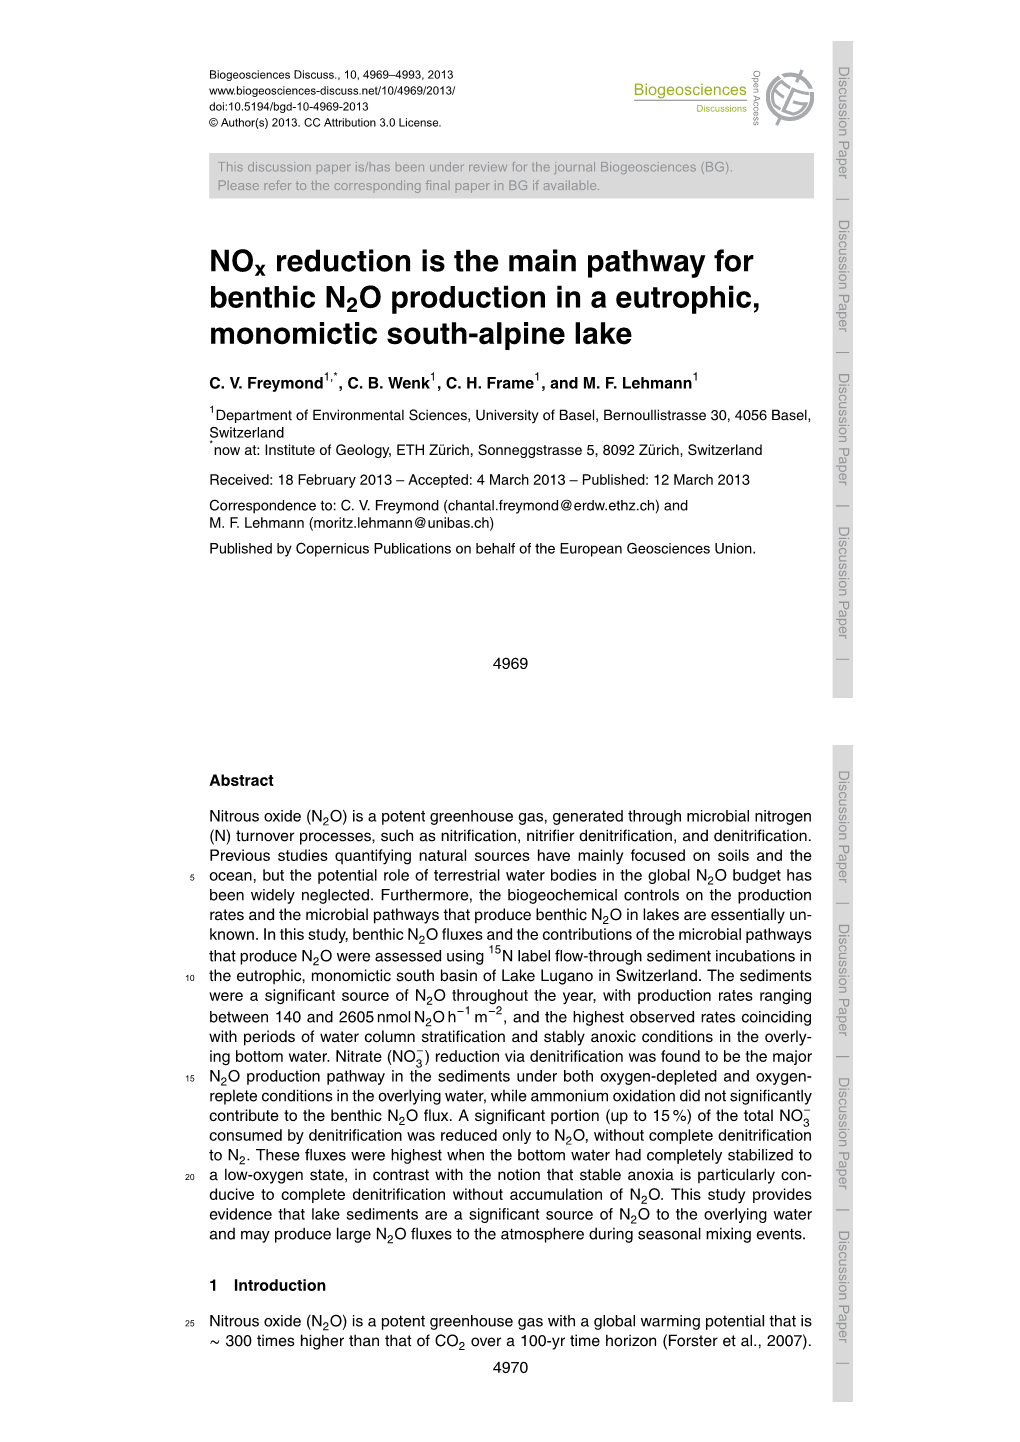 Nox Reduction Is the Main Pathway for Benthic N2O Production in A